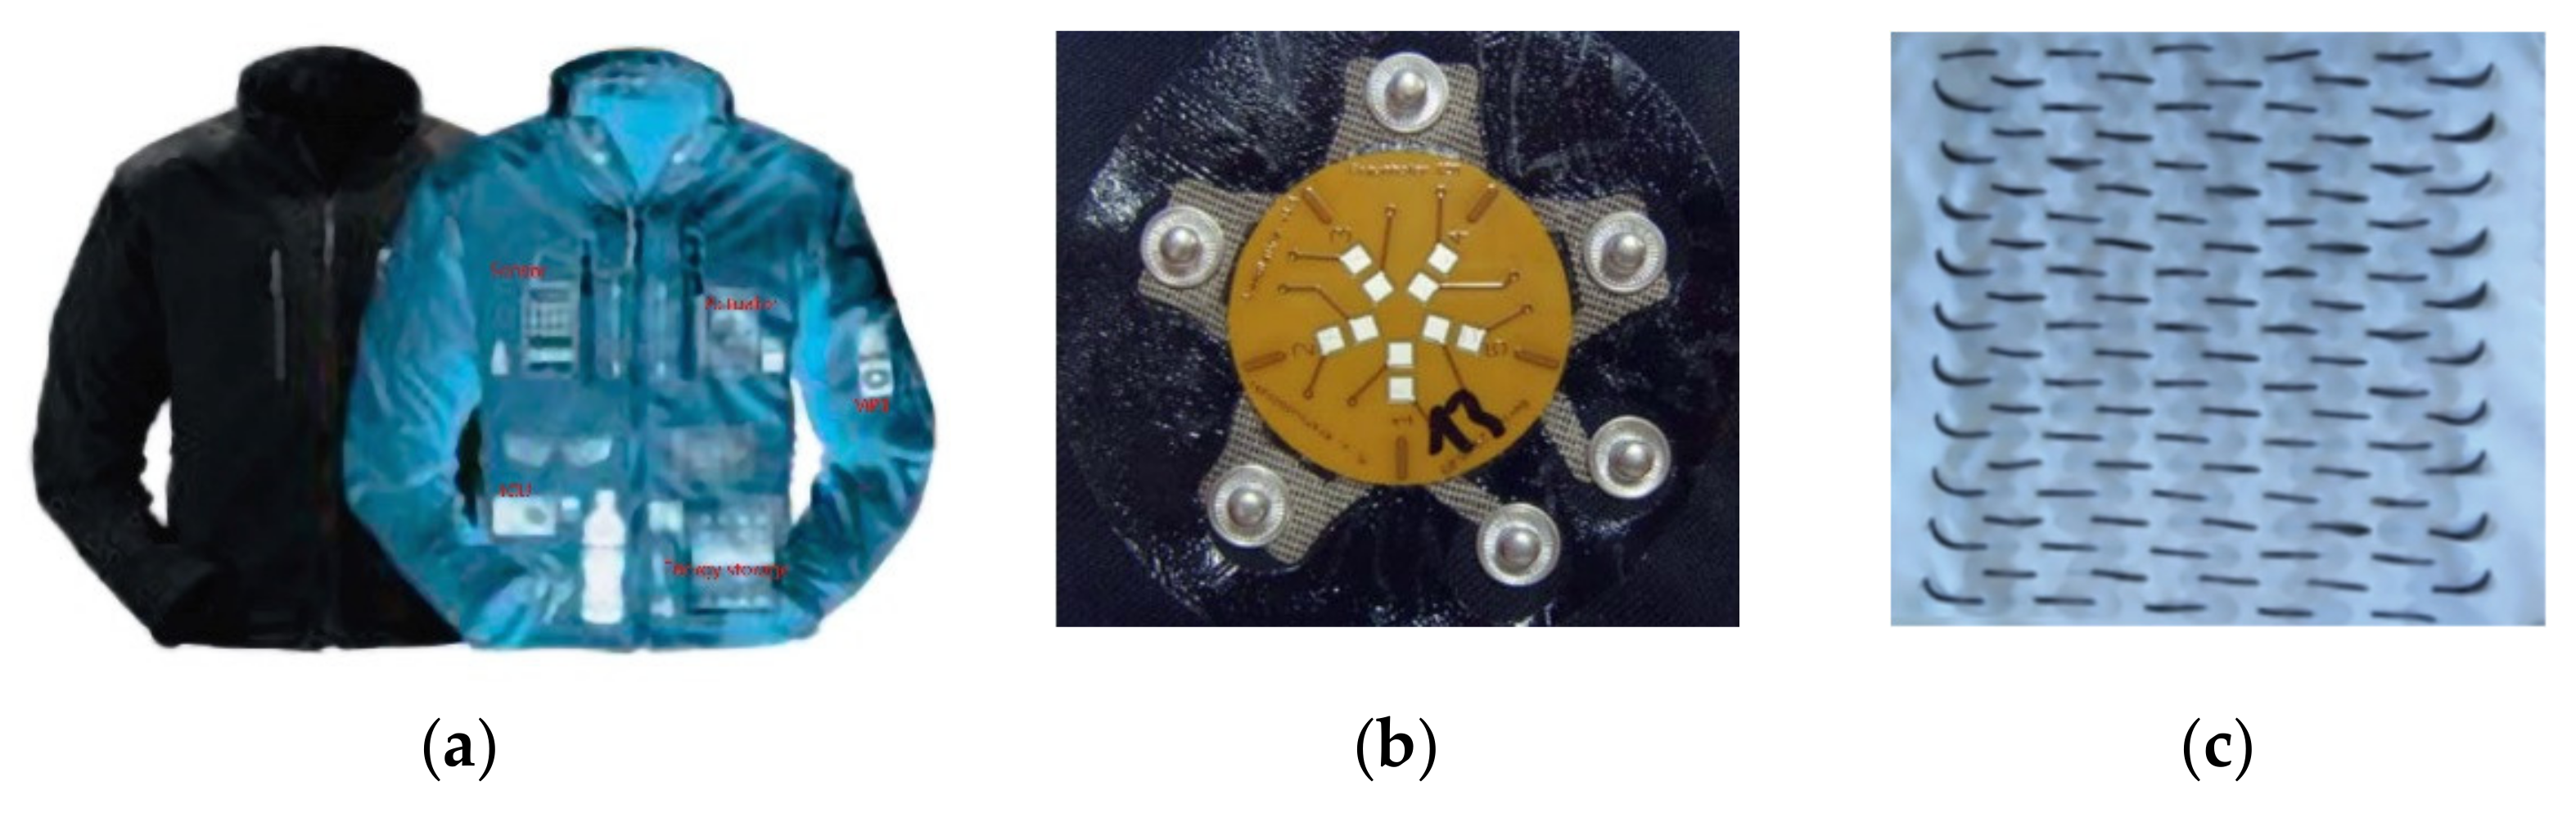 Materials | Free Full-Text | Review on the Integration of Microelectronics  for E-Textile